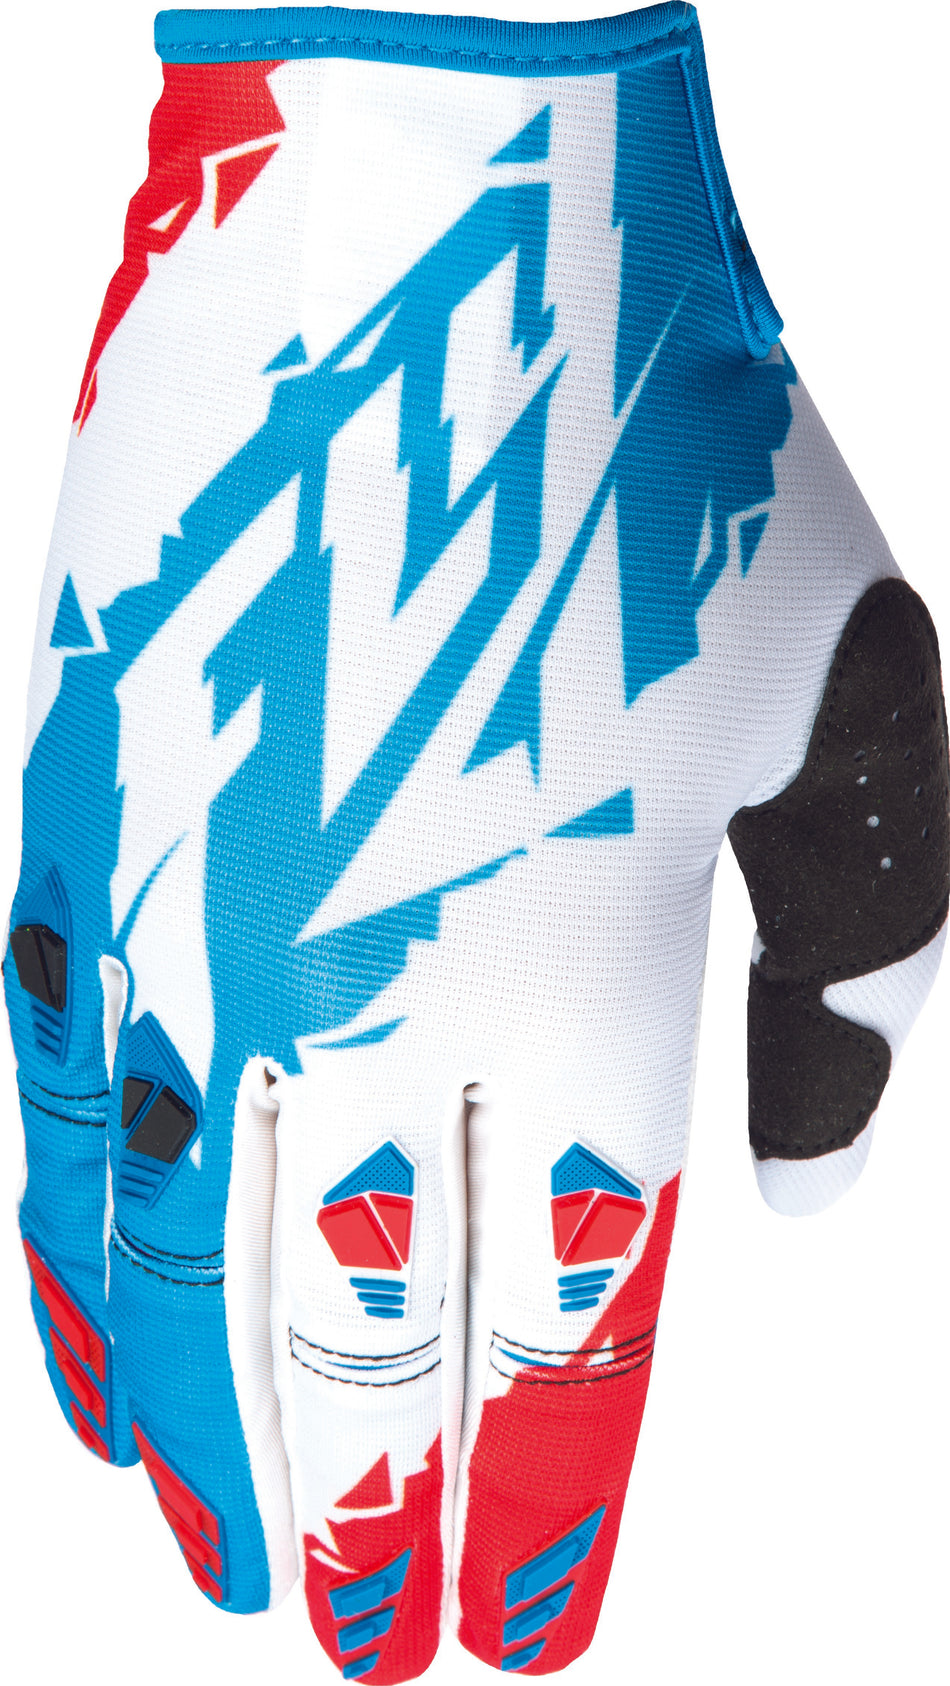 FLY RACING Kinetic Glove Red/White/Blue Sz 6 Yl 370-41106